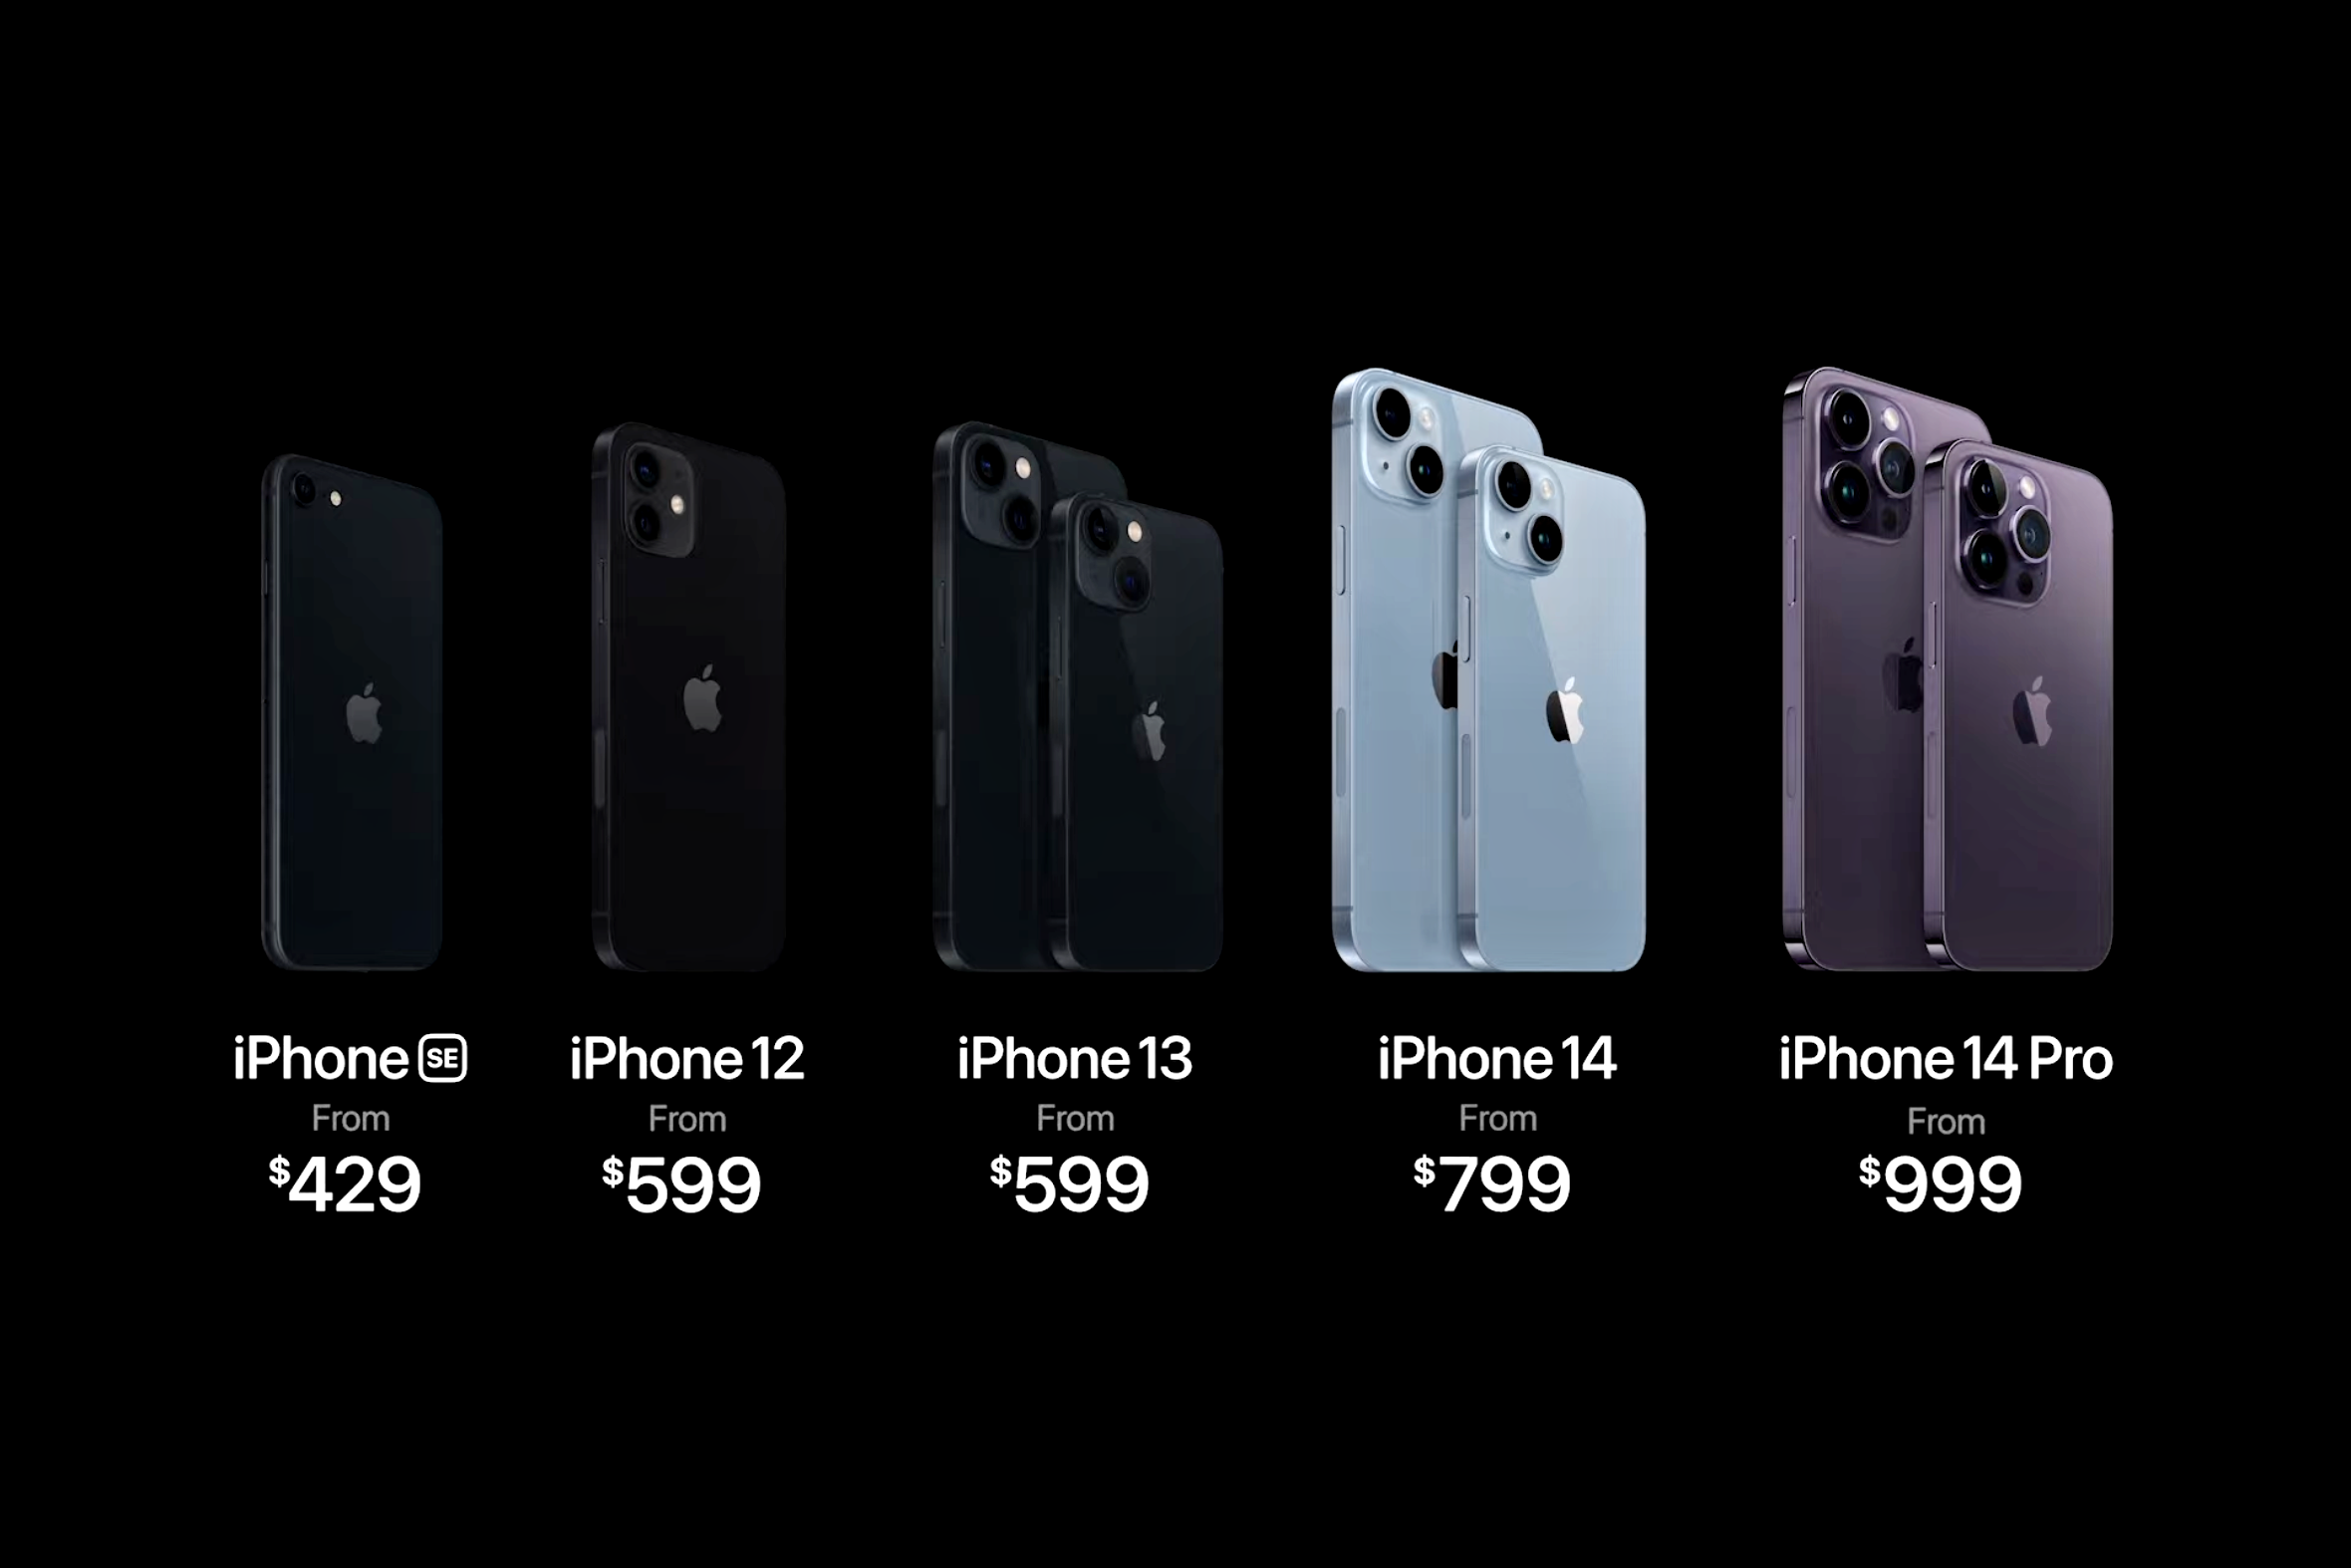 Apple's lineup after the iPhone 14 reveal - Apple's refreshed iPhone lineup ditches two models, check out which